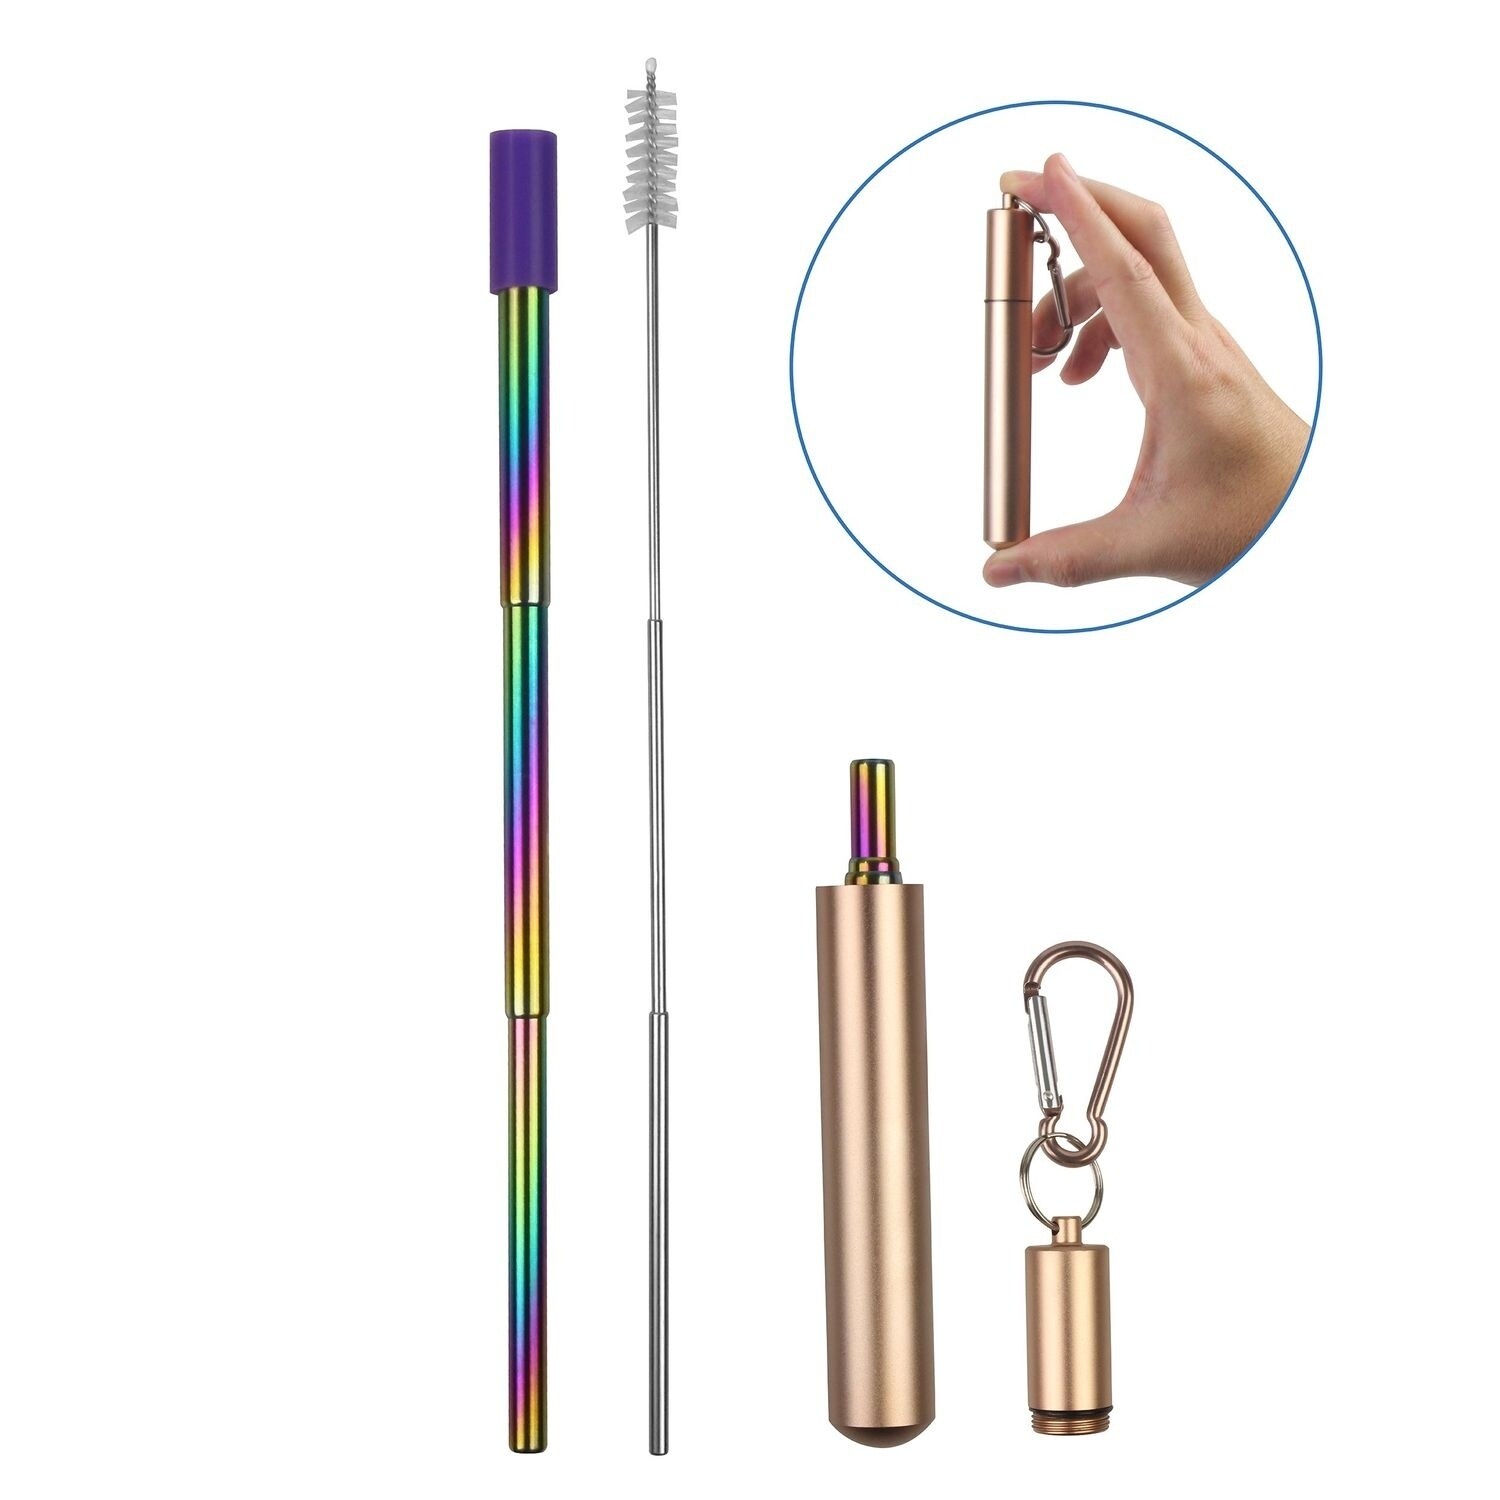 Collapsible Reusable Stainless-Steel Drinking Straw with Silicone Tip, Colored Straw / Purple